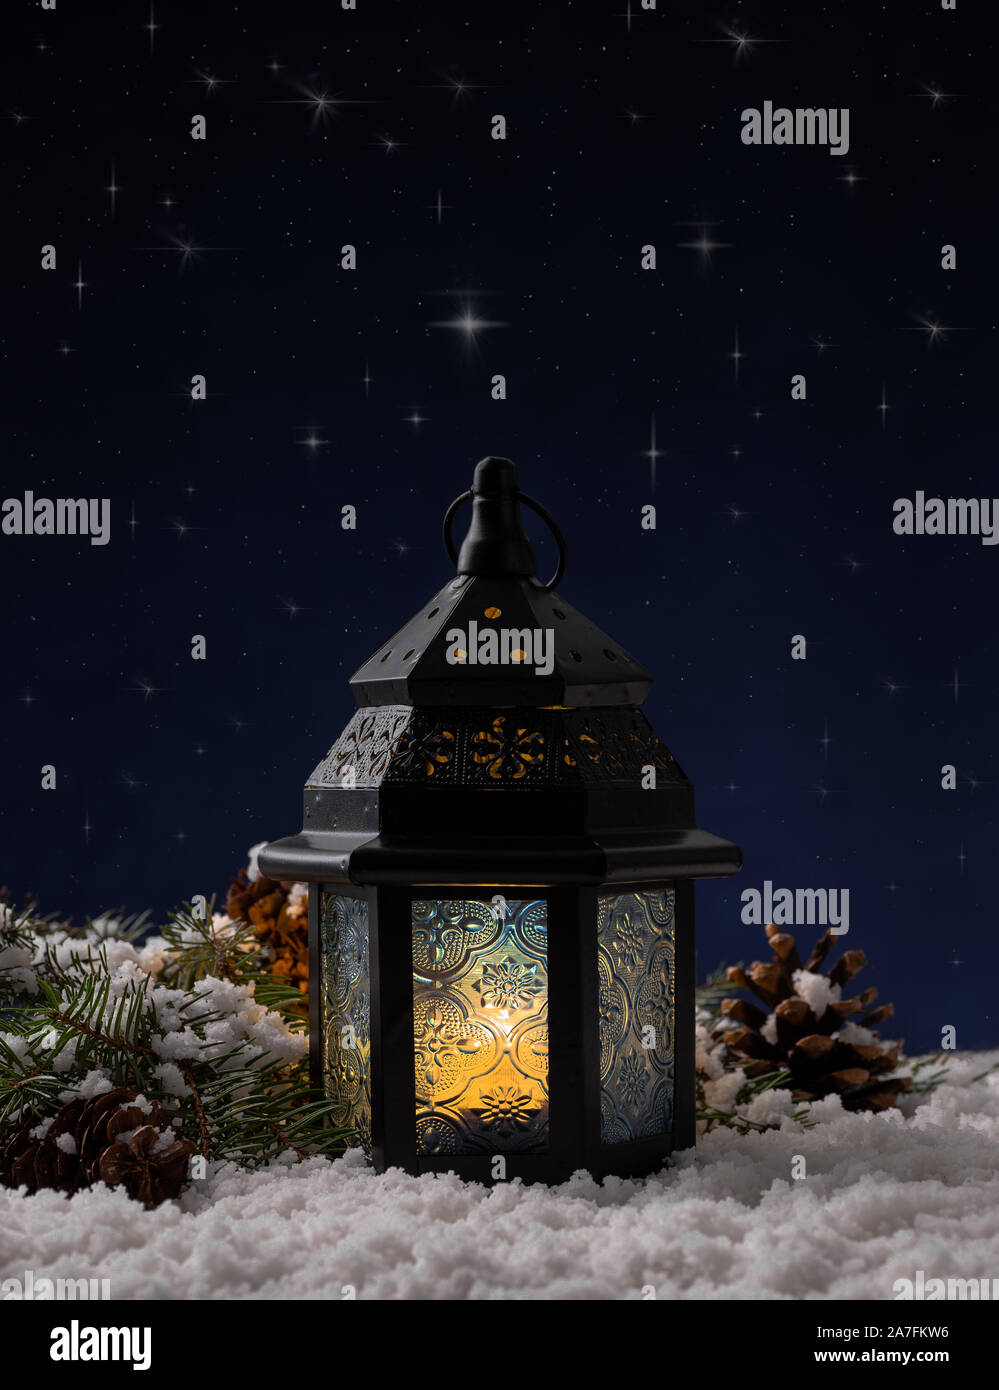 Glowing Christmas lantern on snow against a night sky background with shining stars Stock Photo